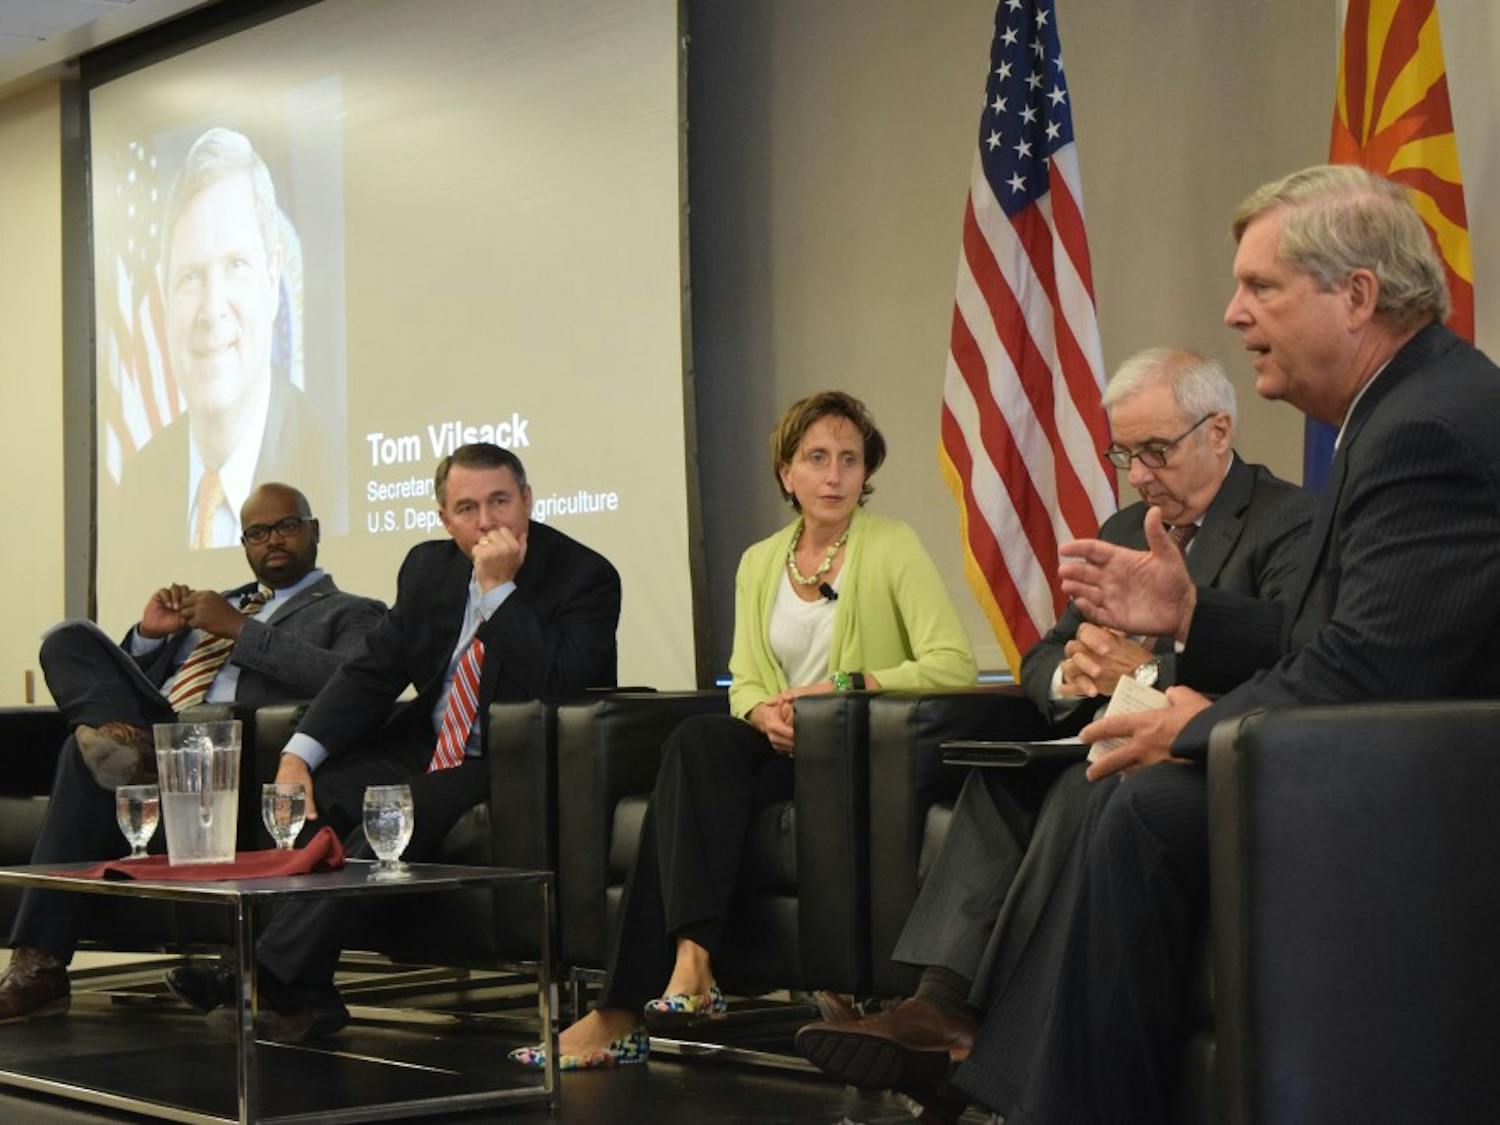 Tom Vilsack,&nbsp;United States Secretary of Agriculture,&nbsp;runs a panel discussion at&nbsp;the Fall Sustainability Forum at ASU's Tempe campus on Wednesday, Sept. 14, 2016.&nbsp;From left to right:&nbsp;Osvaldo Sala, Diane Holdorf, Mark Killian,&nbsp;Marshall Johnson and Tom Vilsack.